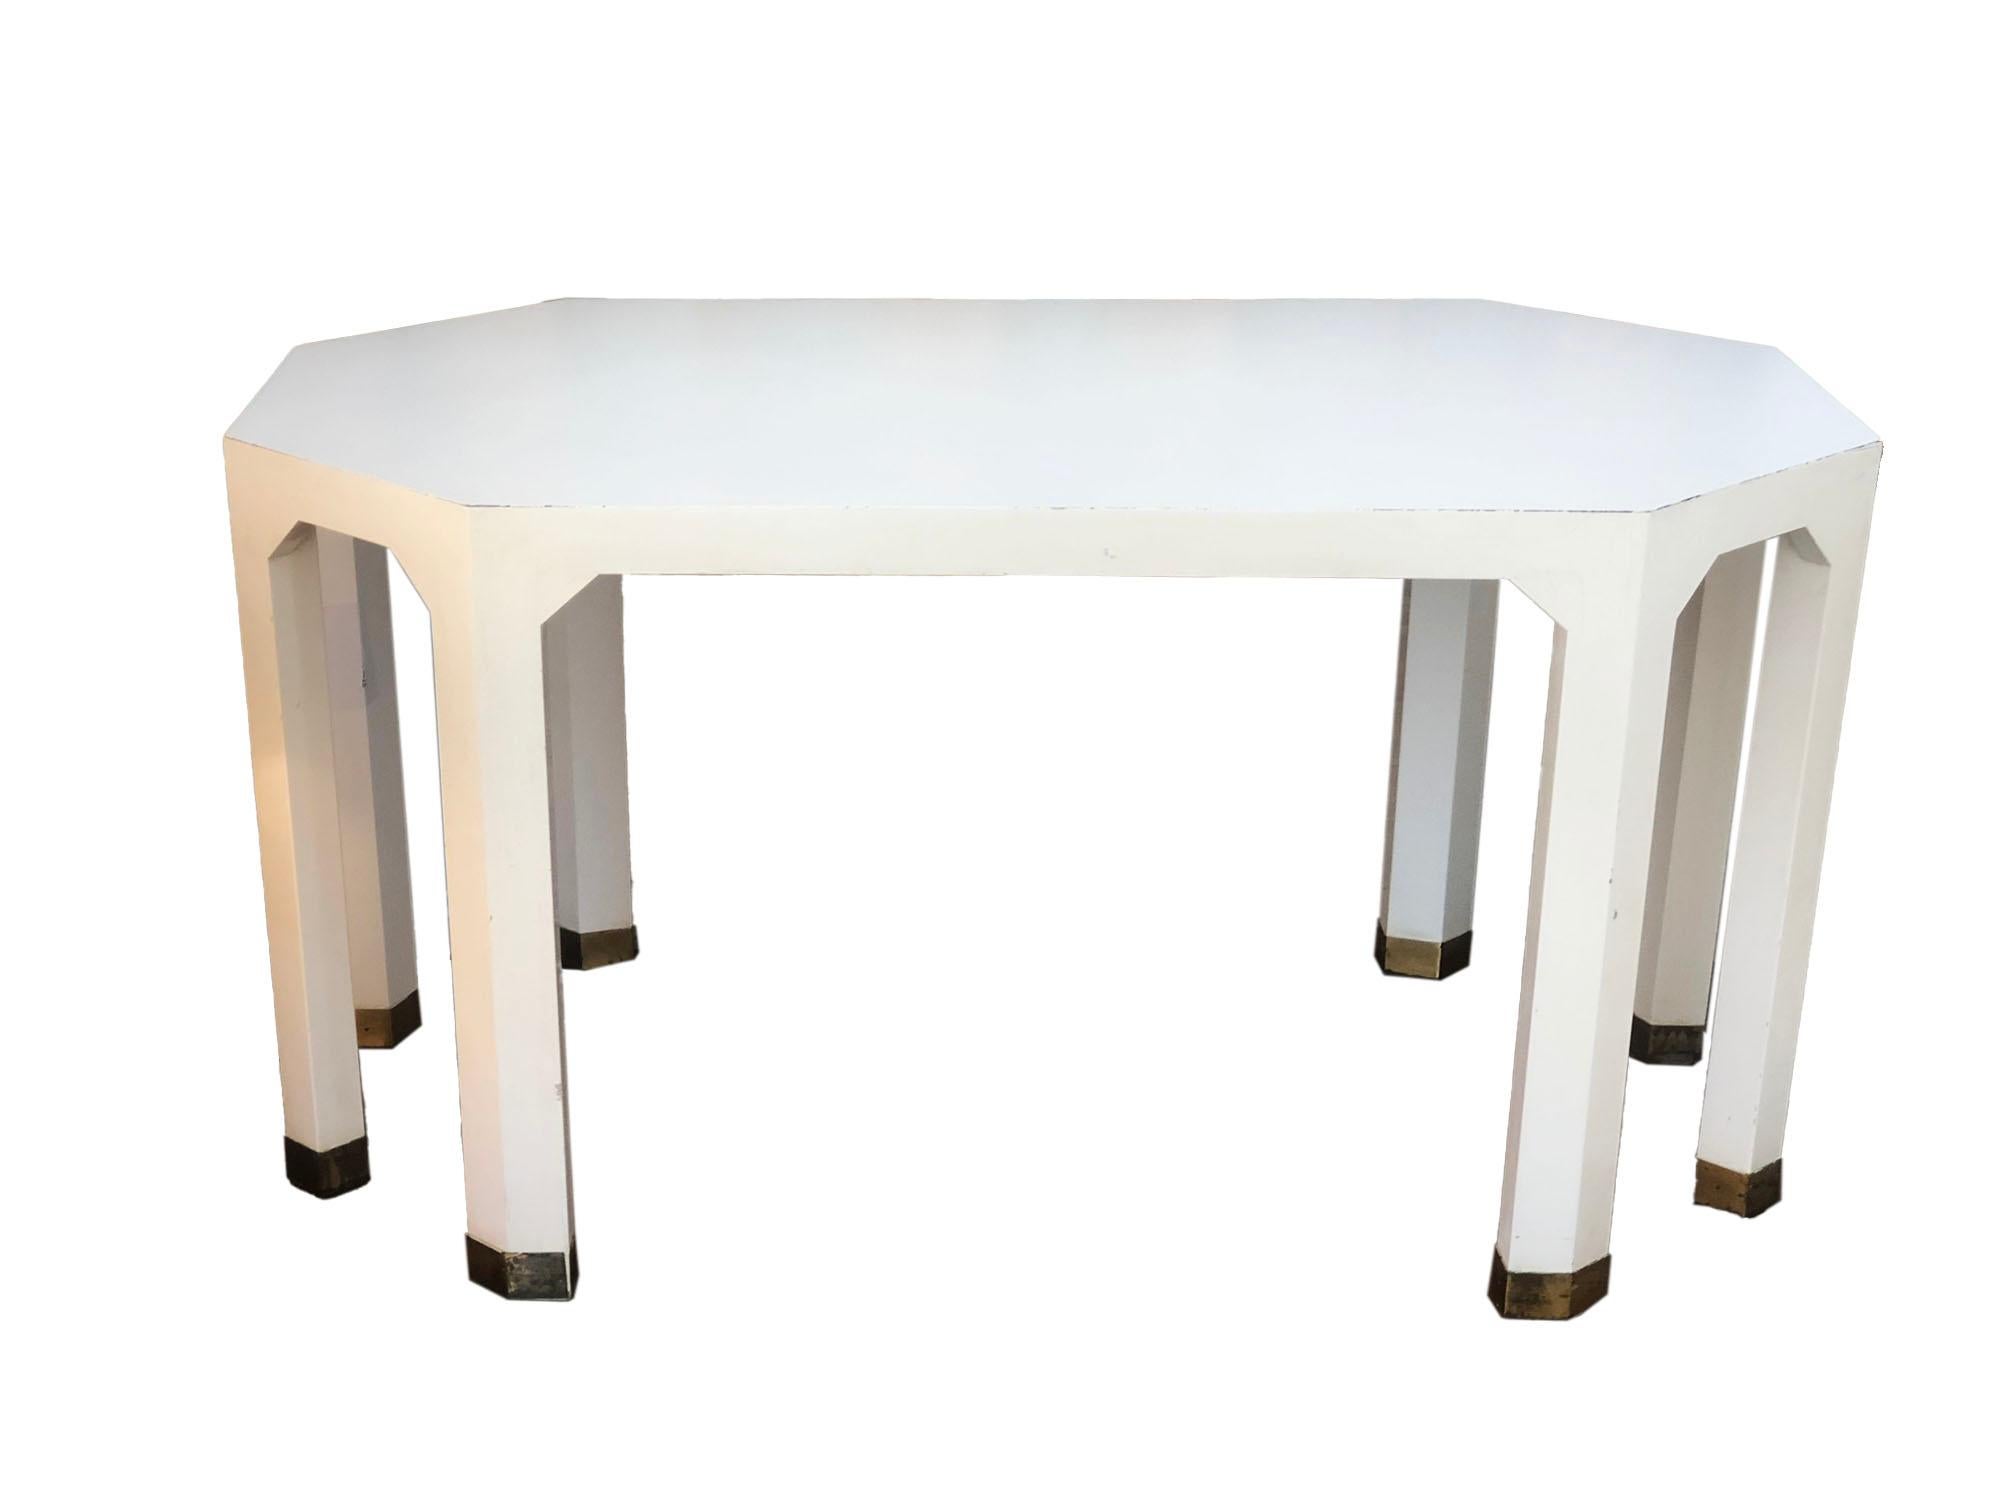 This pair of unique rectangle octagon corners end tables from midcentury have a crackle paint finish on the legs. The legs also have brass feet. The top of the table is cream laminate and blends into the paint almost seamlessly. These tables make